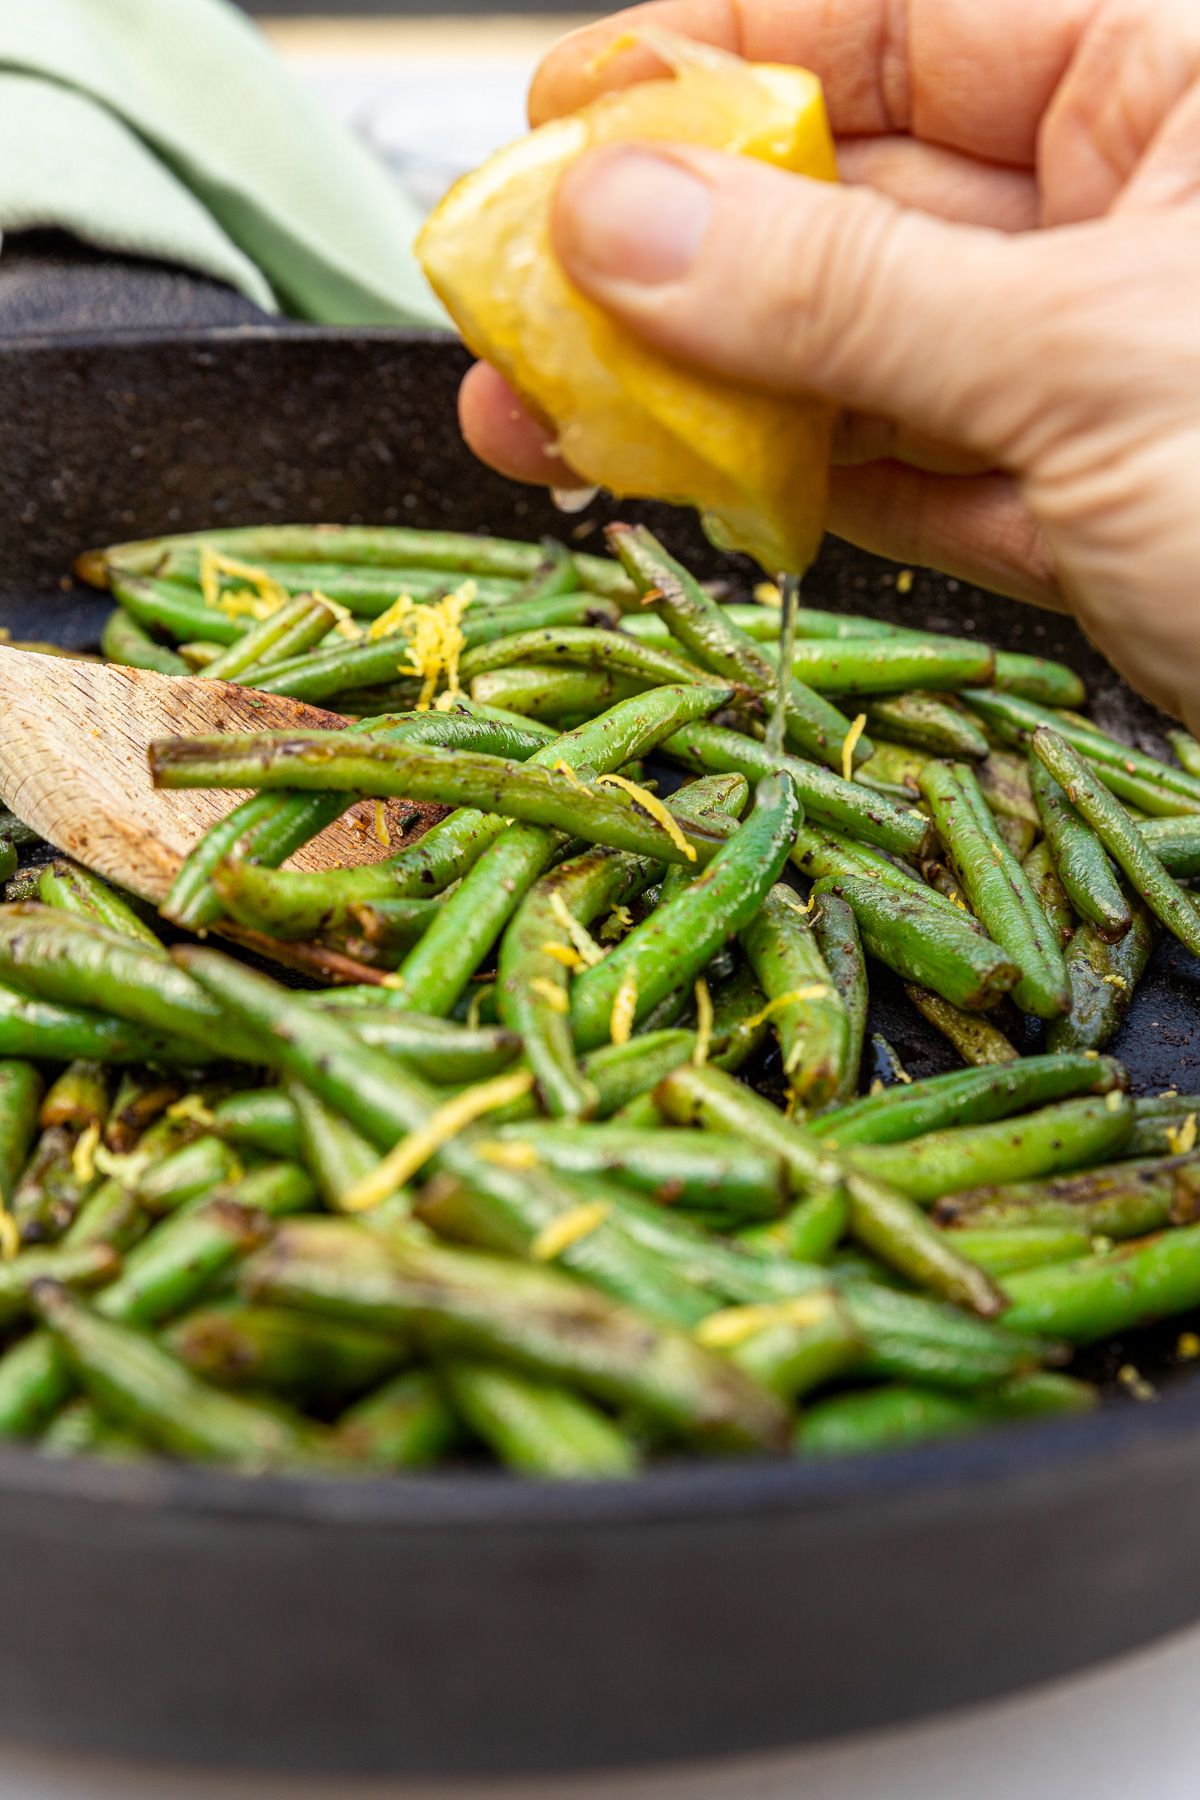 Closeup of someone squeezing half a lemon into a black cast iron pan of sauteed frozen green beans with a pale green tea towel in the background.